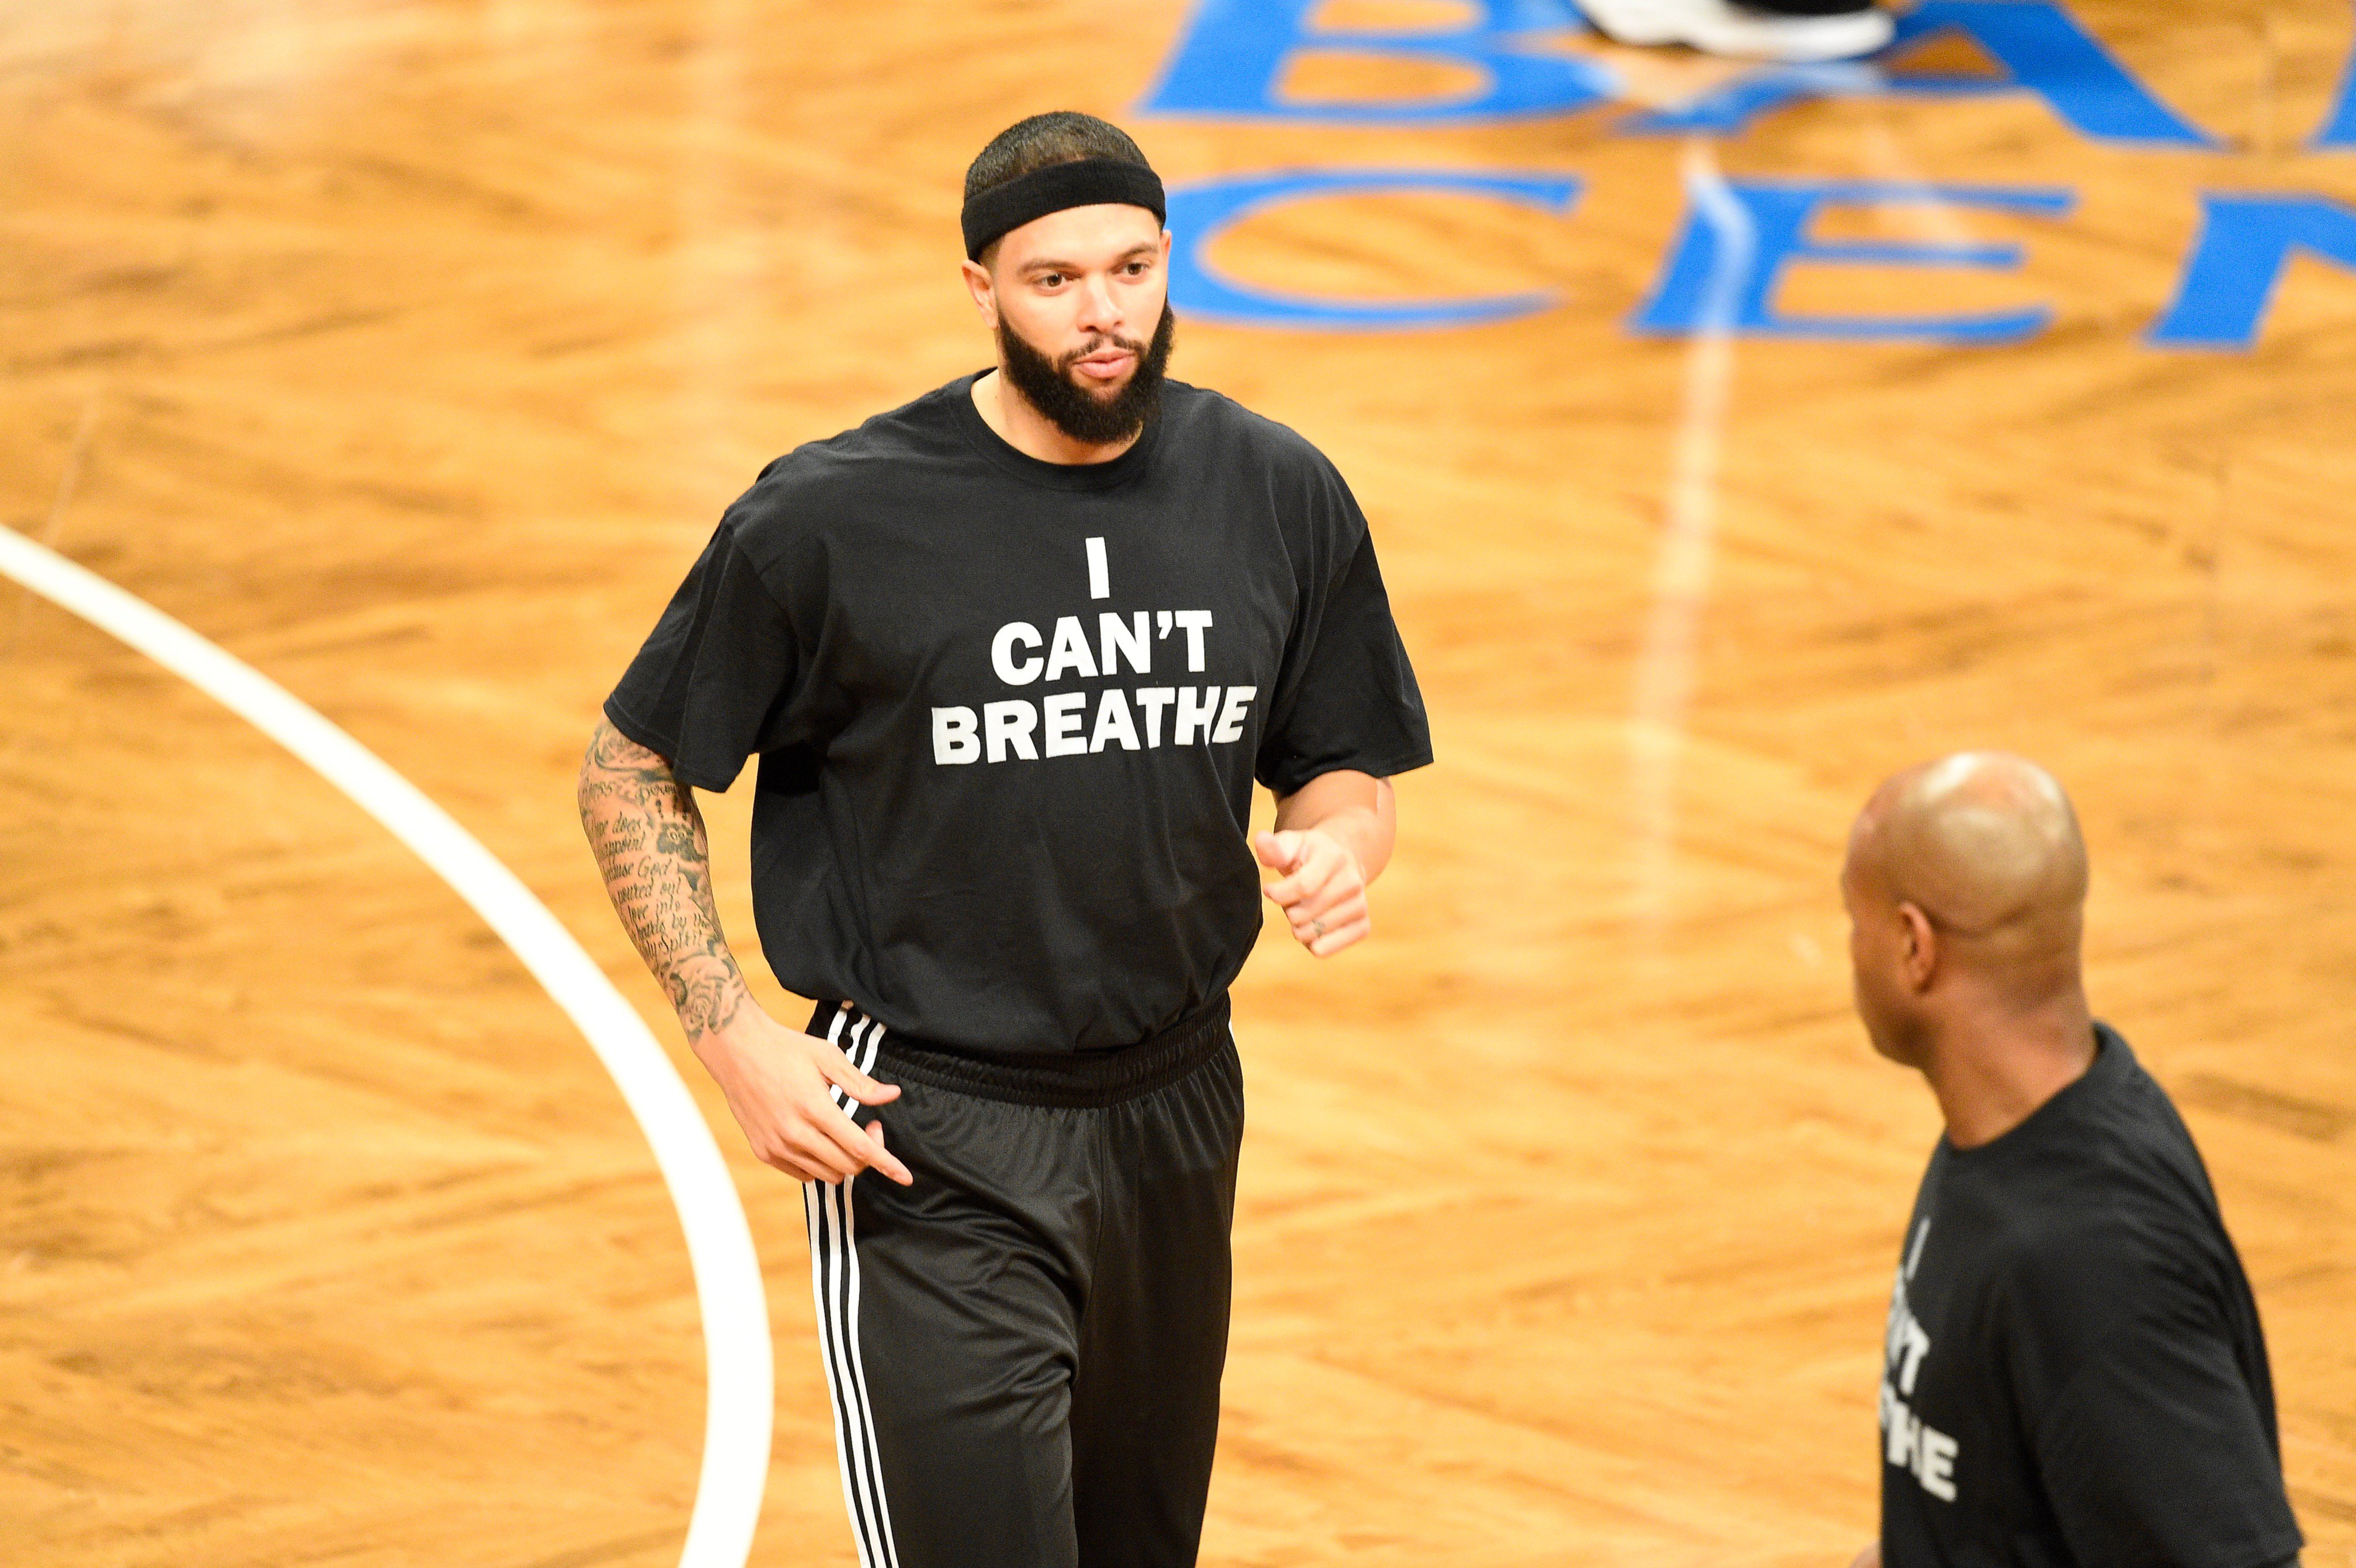 LeBron James, Other NBA Players Wear I Can't Breathe Shirts Before Game